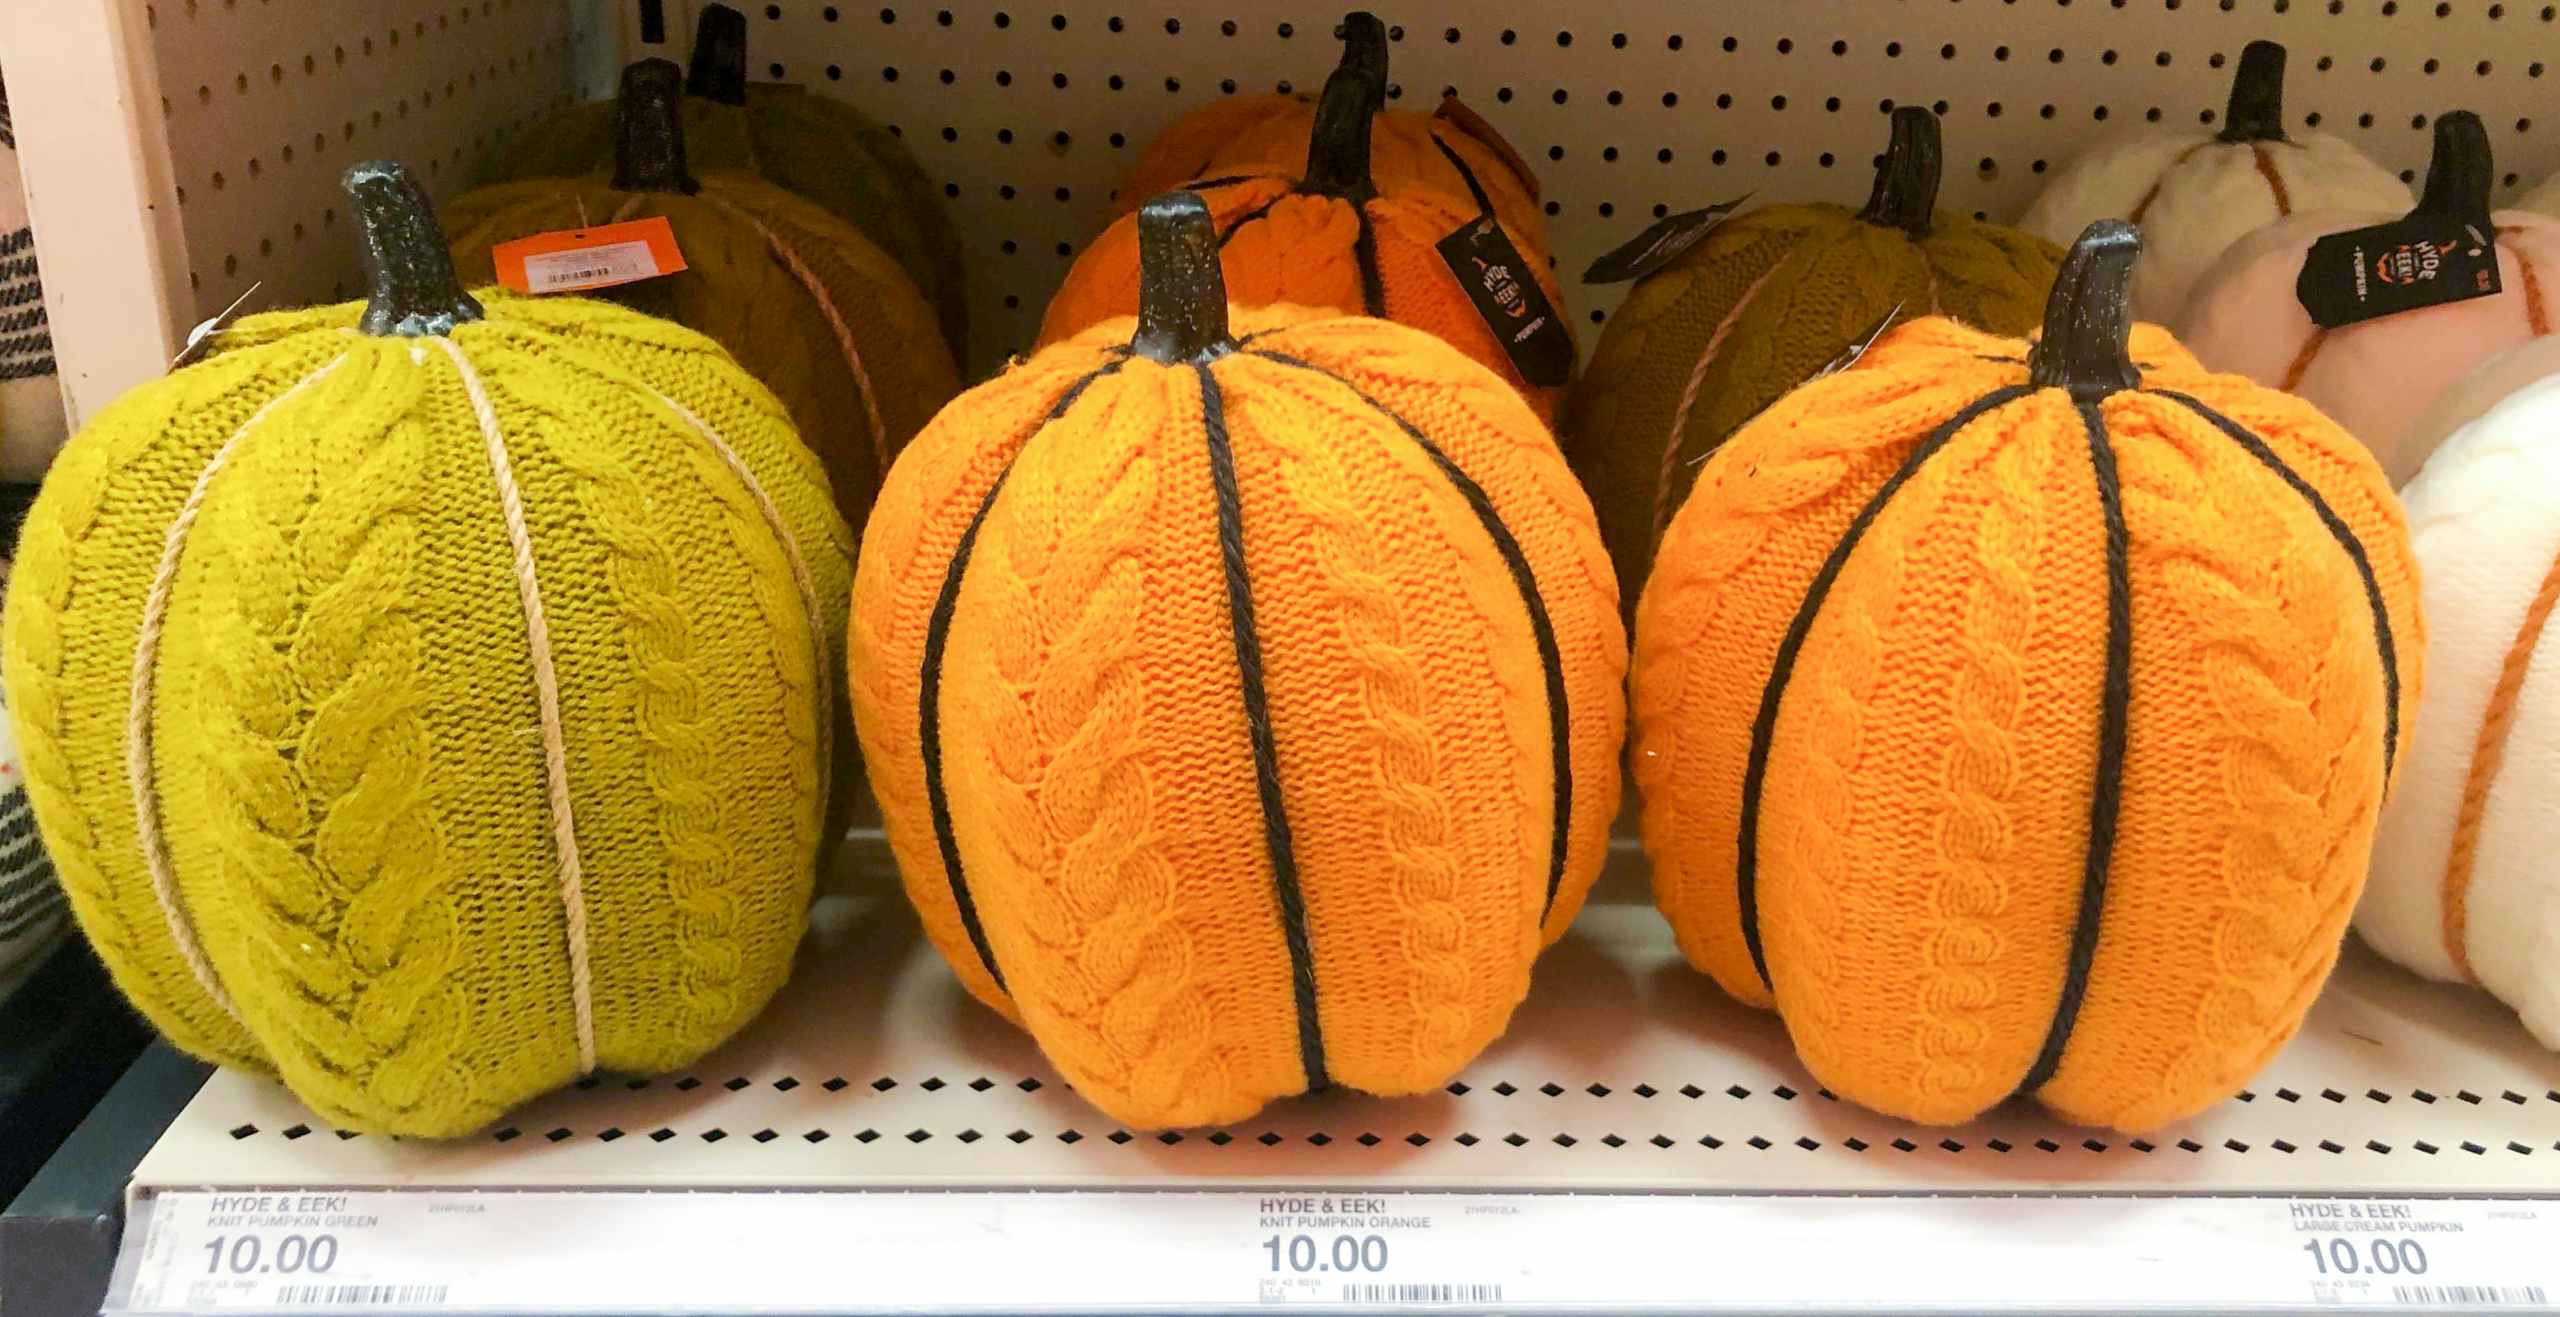 target-hyde-and-eek-cable-knit-pumpkins-2021